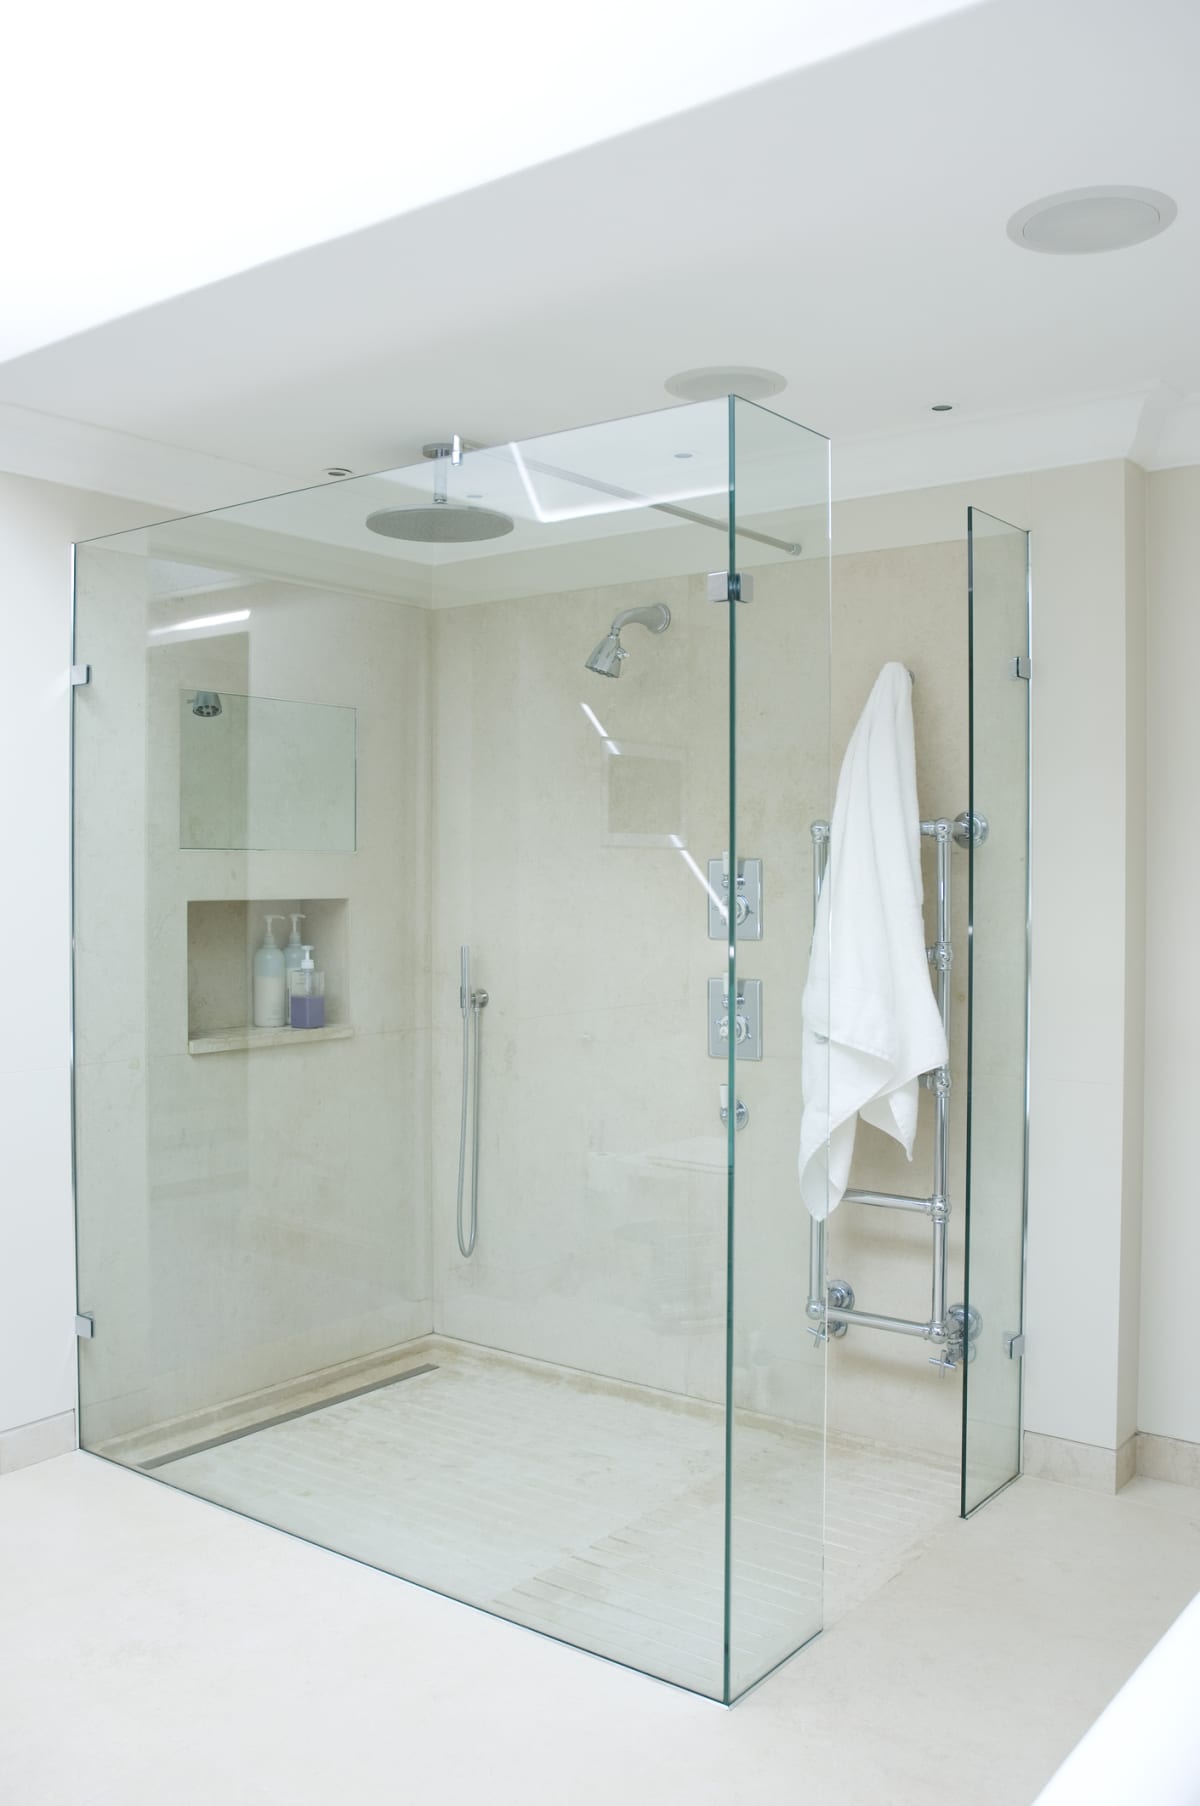 A walk-in shower with glass walls and a linear shower drain